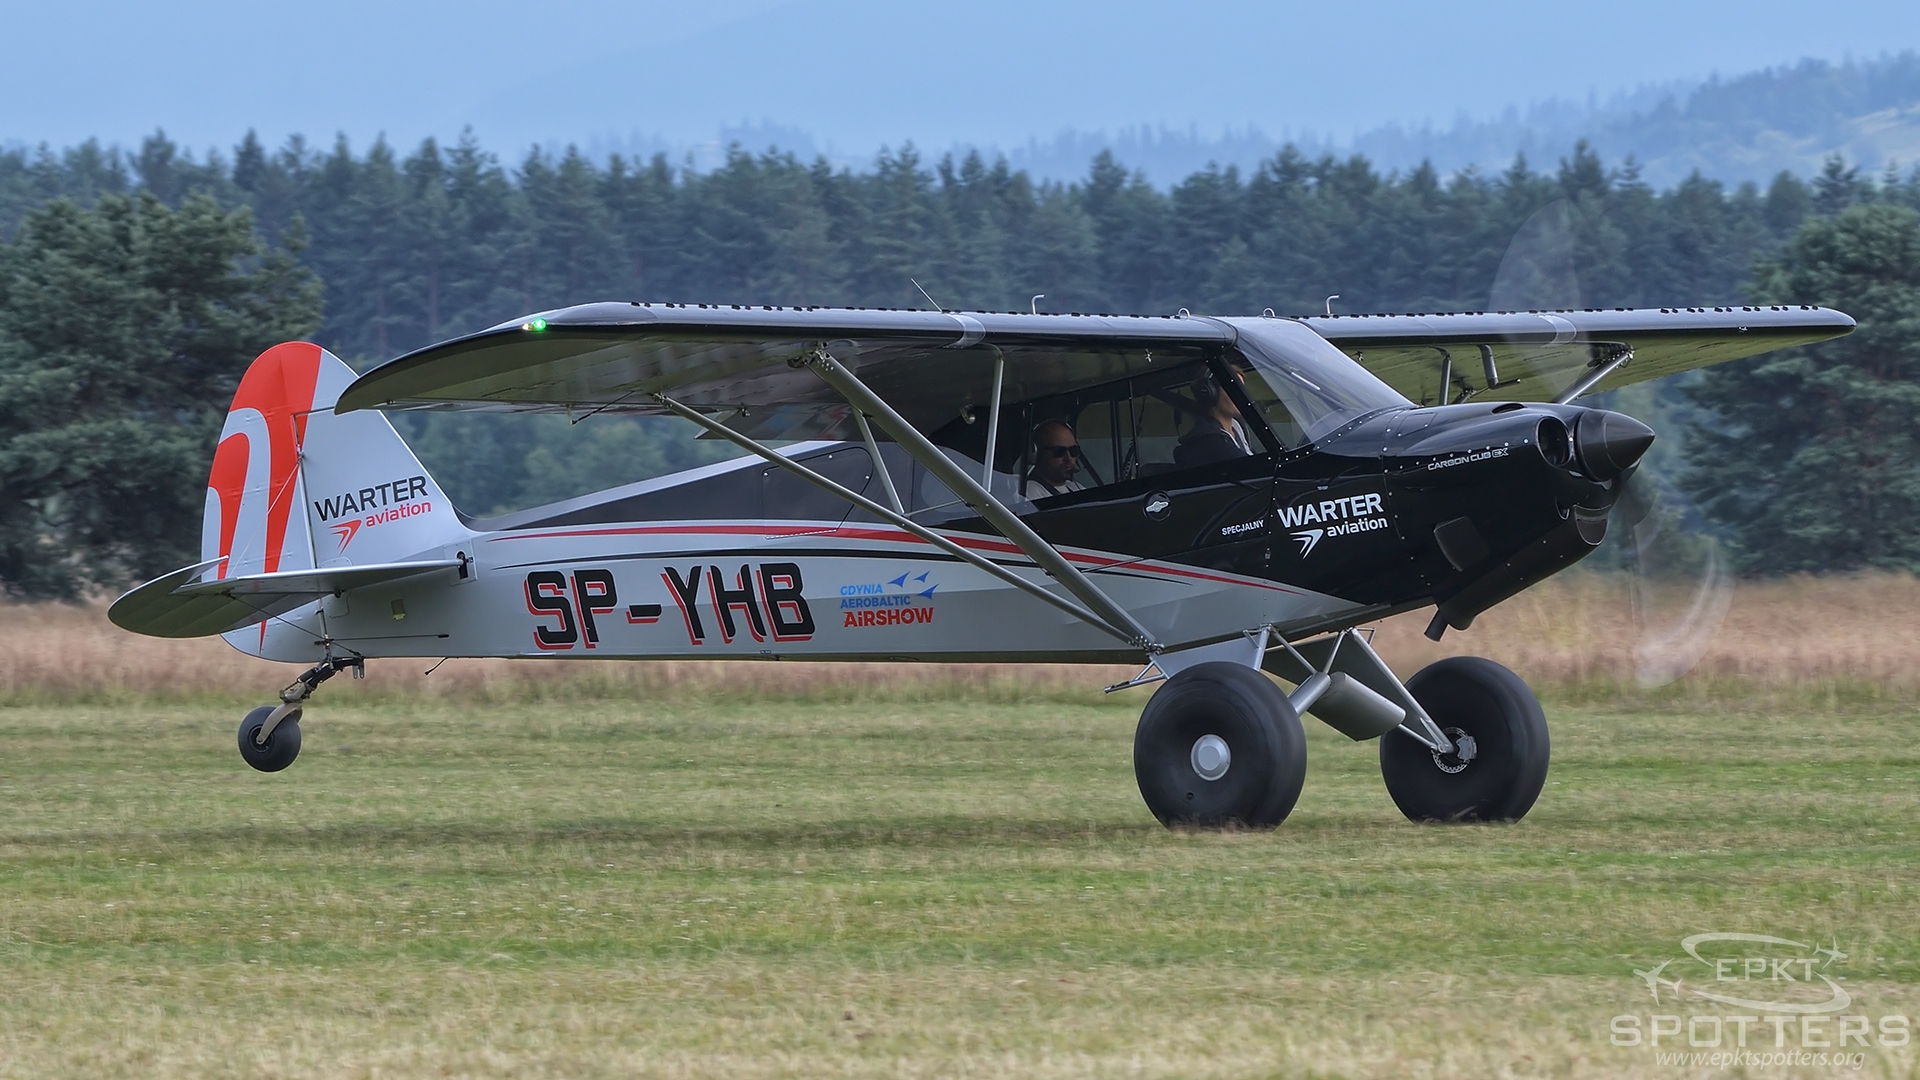 SP-YHB - CubCrafters Carbon Cub  (Private) / Nowy Targ - Nowy Targ Poland [EPNT/]